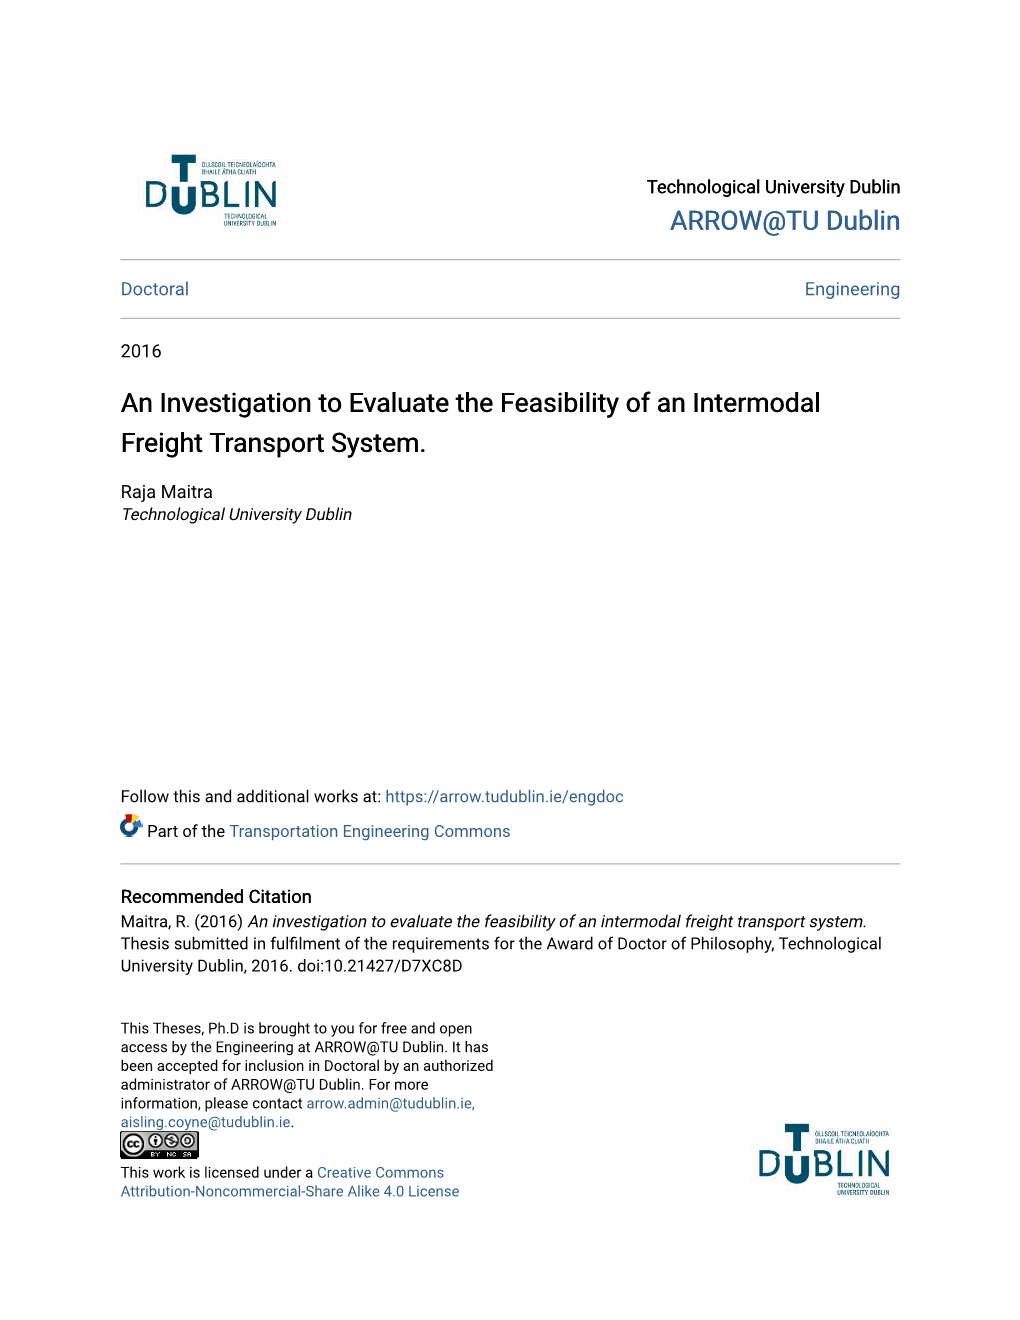 An Investigation to Evaluate the Feasibility of an Intermodal Freight Transport System